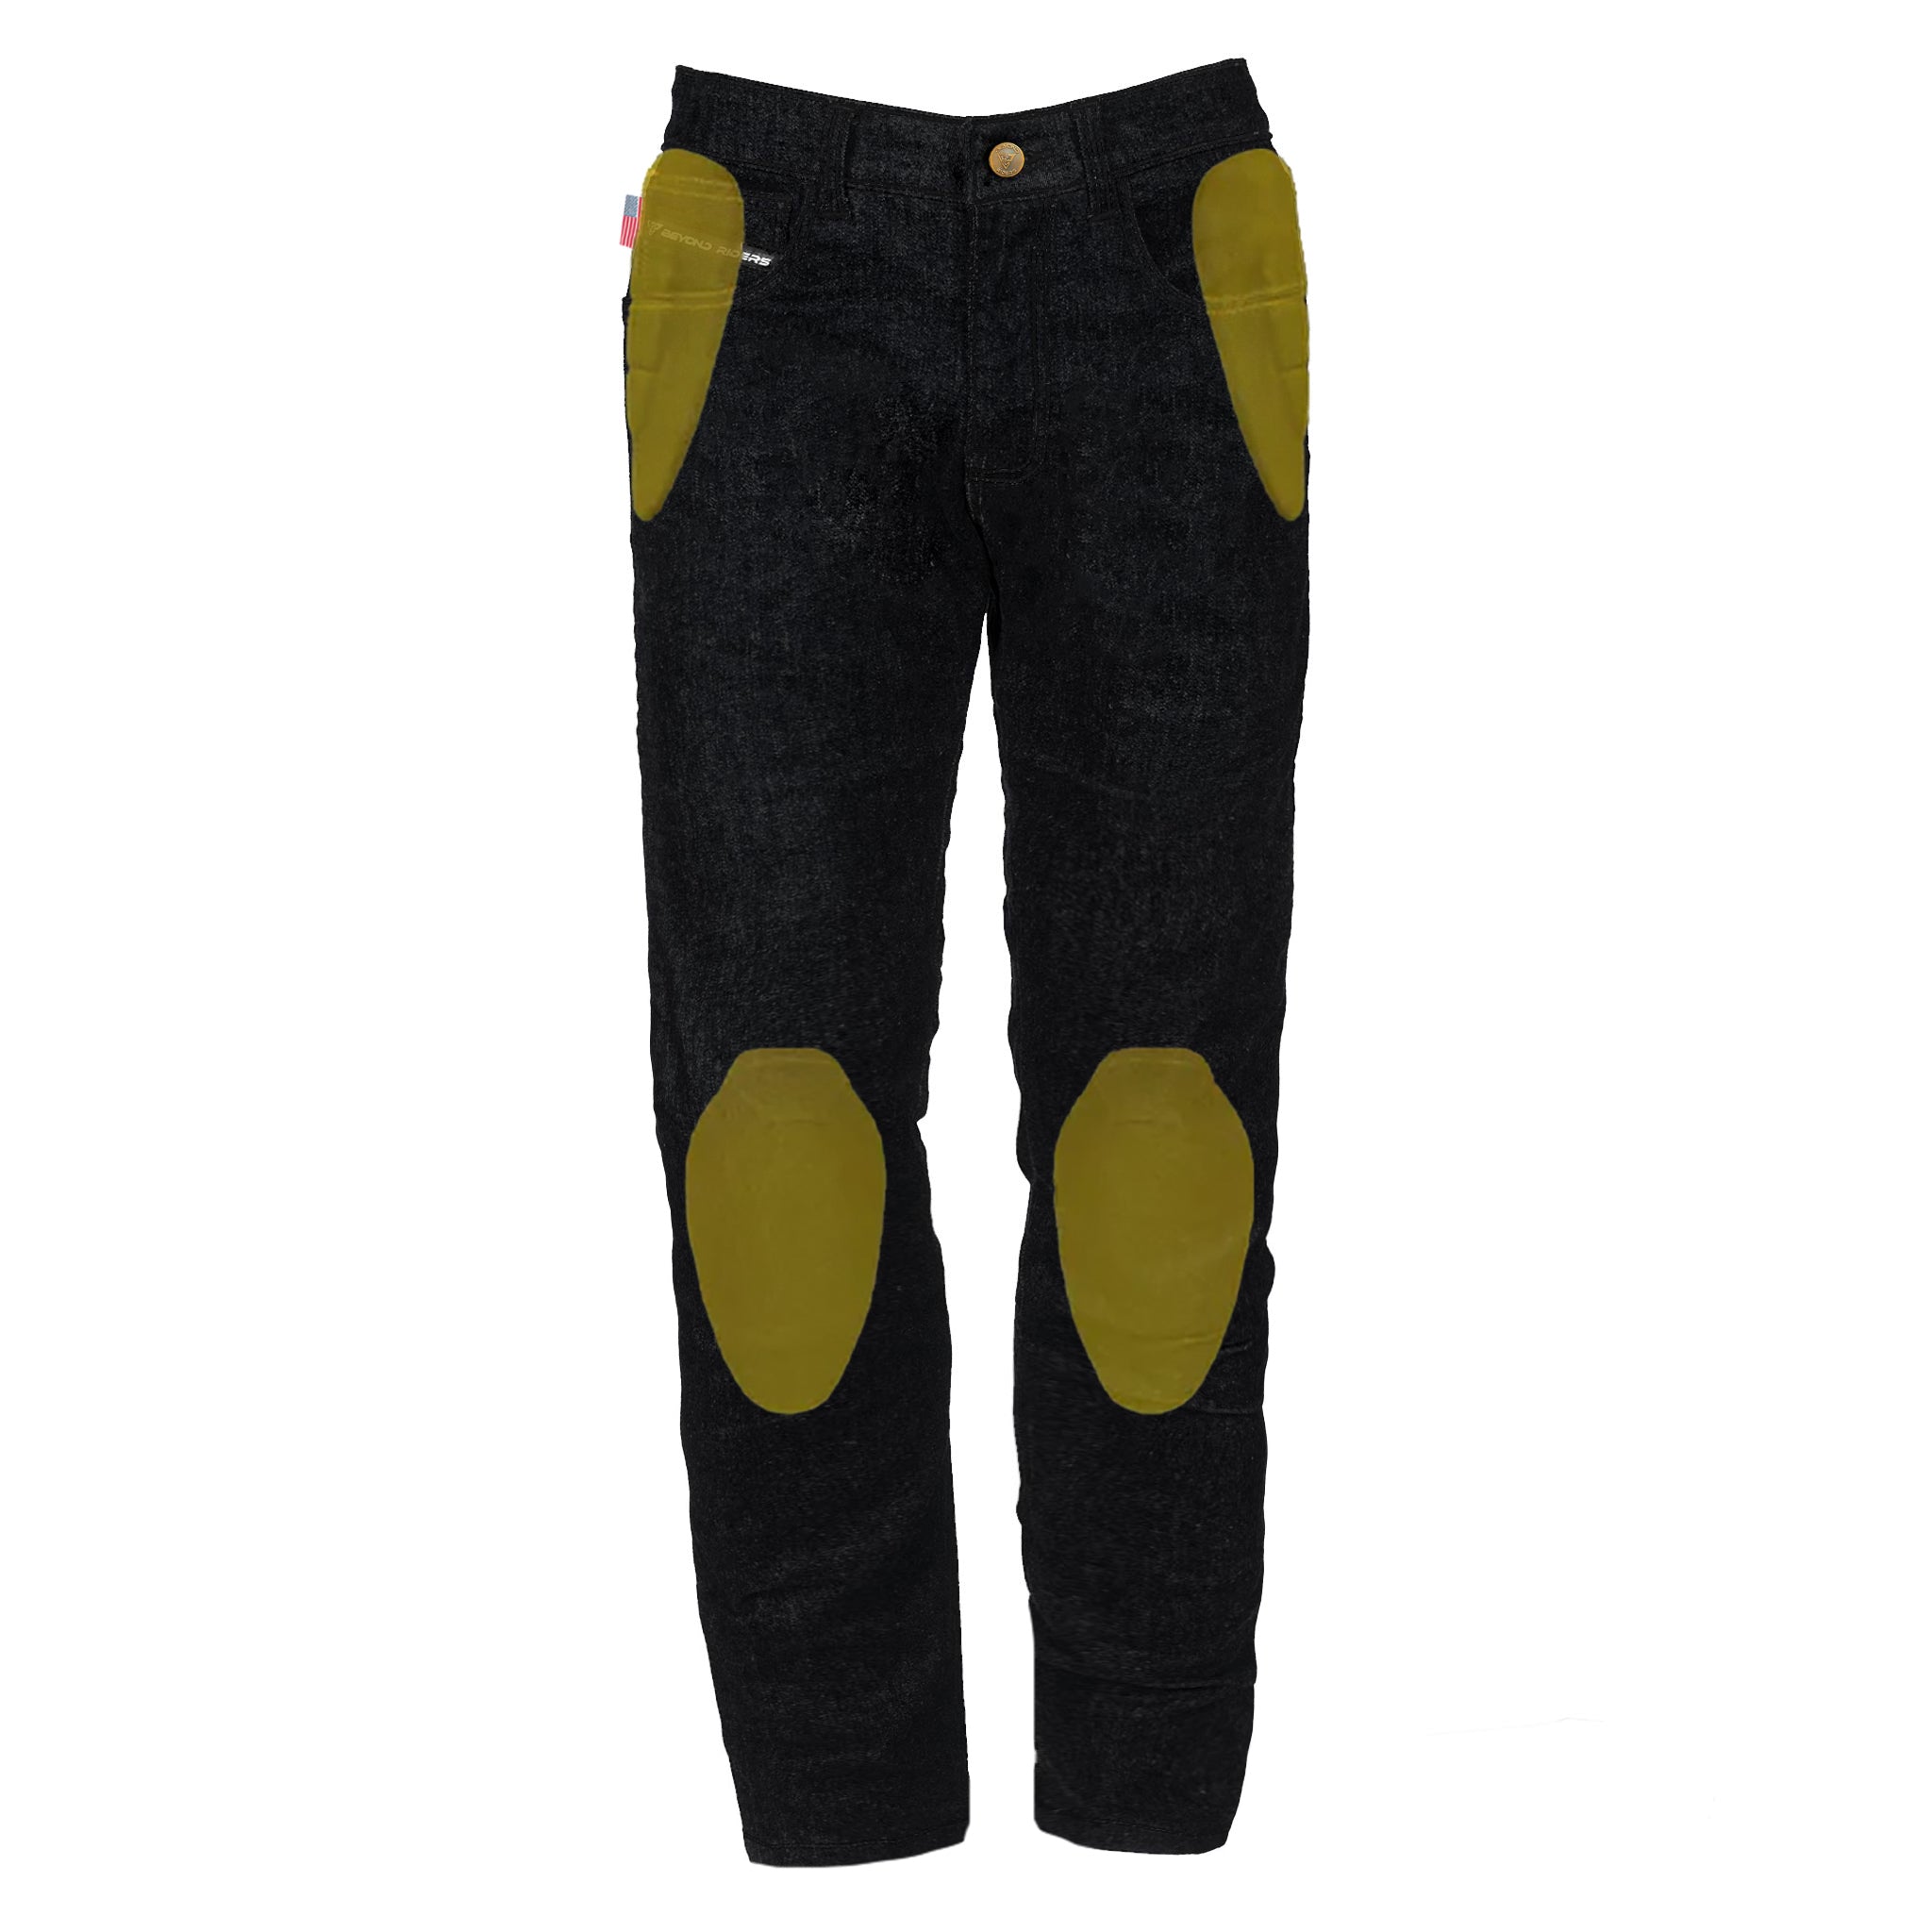 Relaxed Fit Protective Jeans - Black